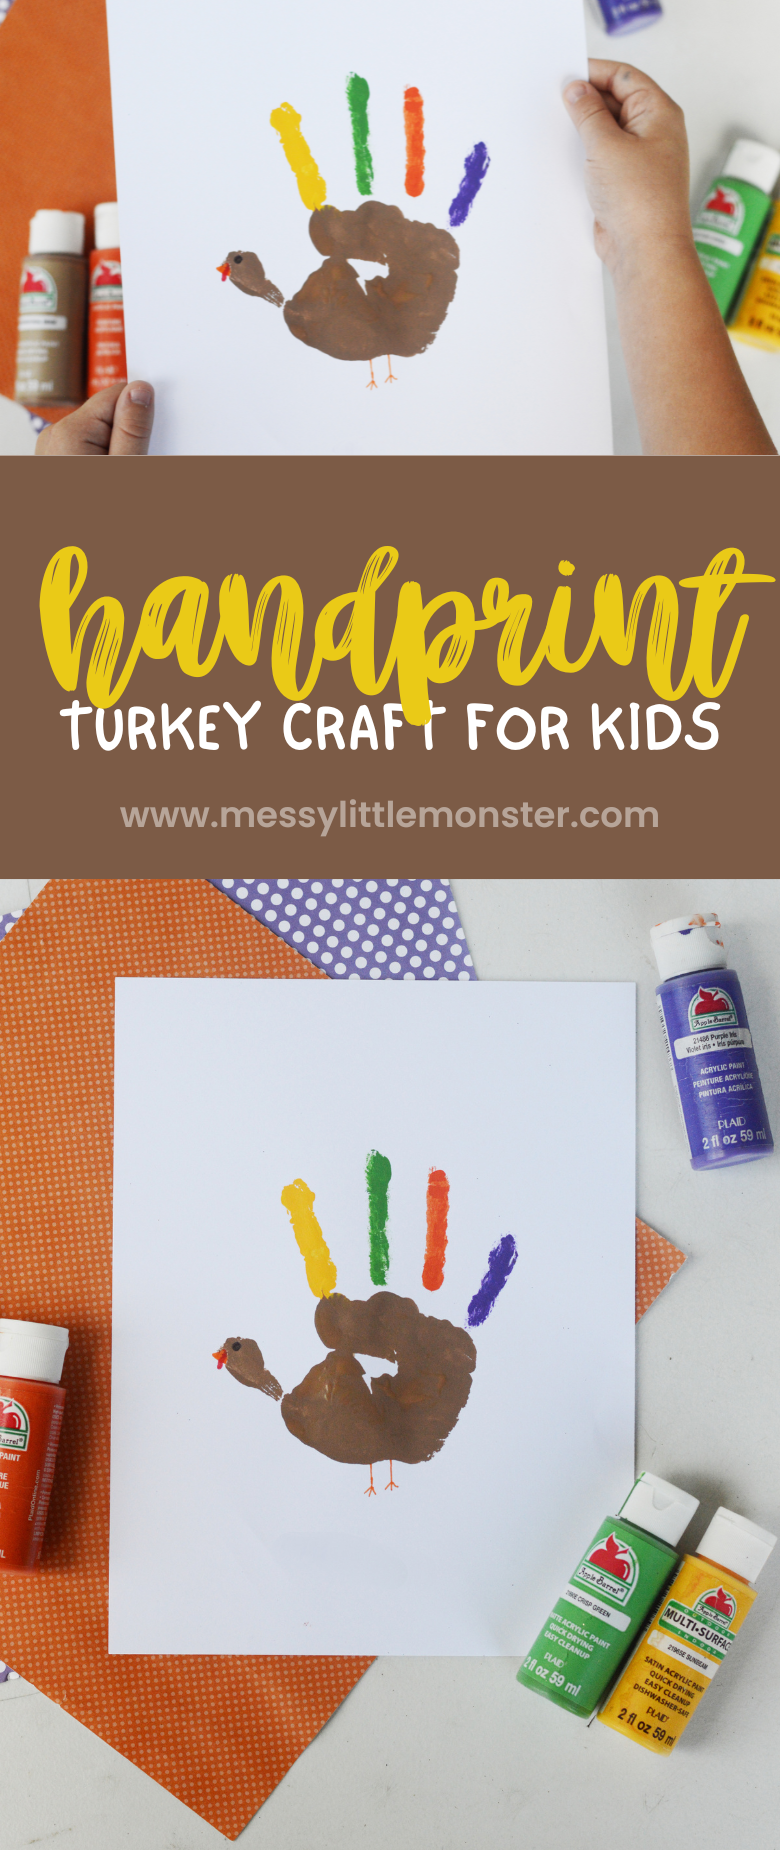 Hand turkey craft for toddlers and preschoolers.